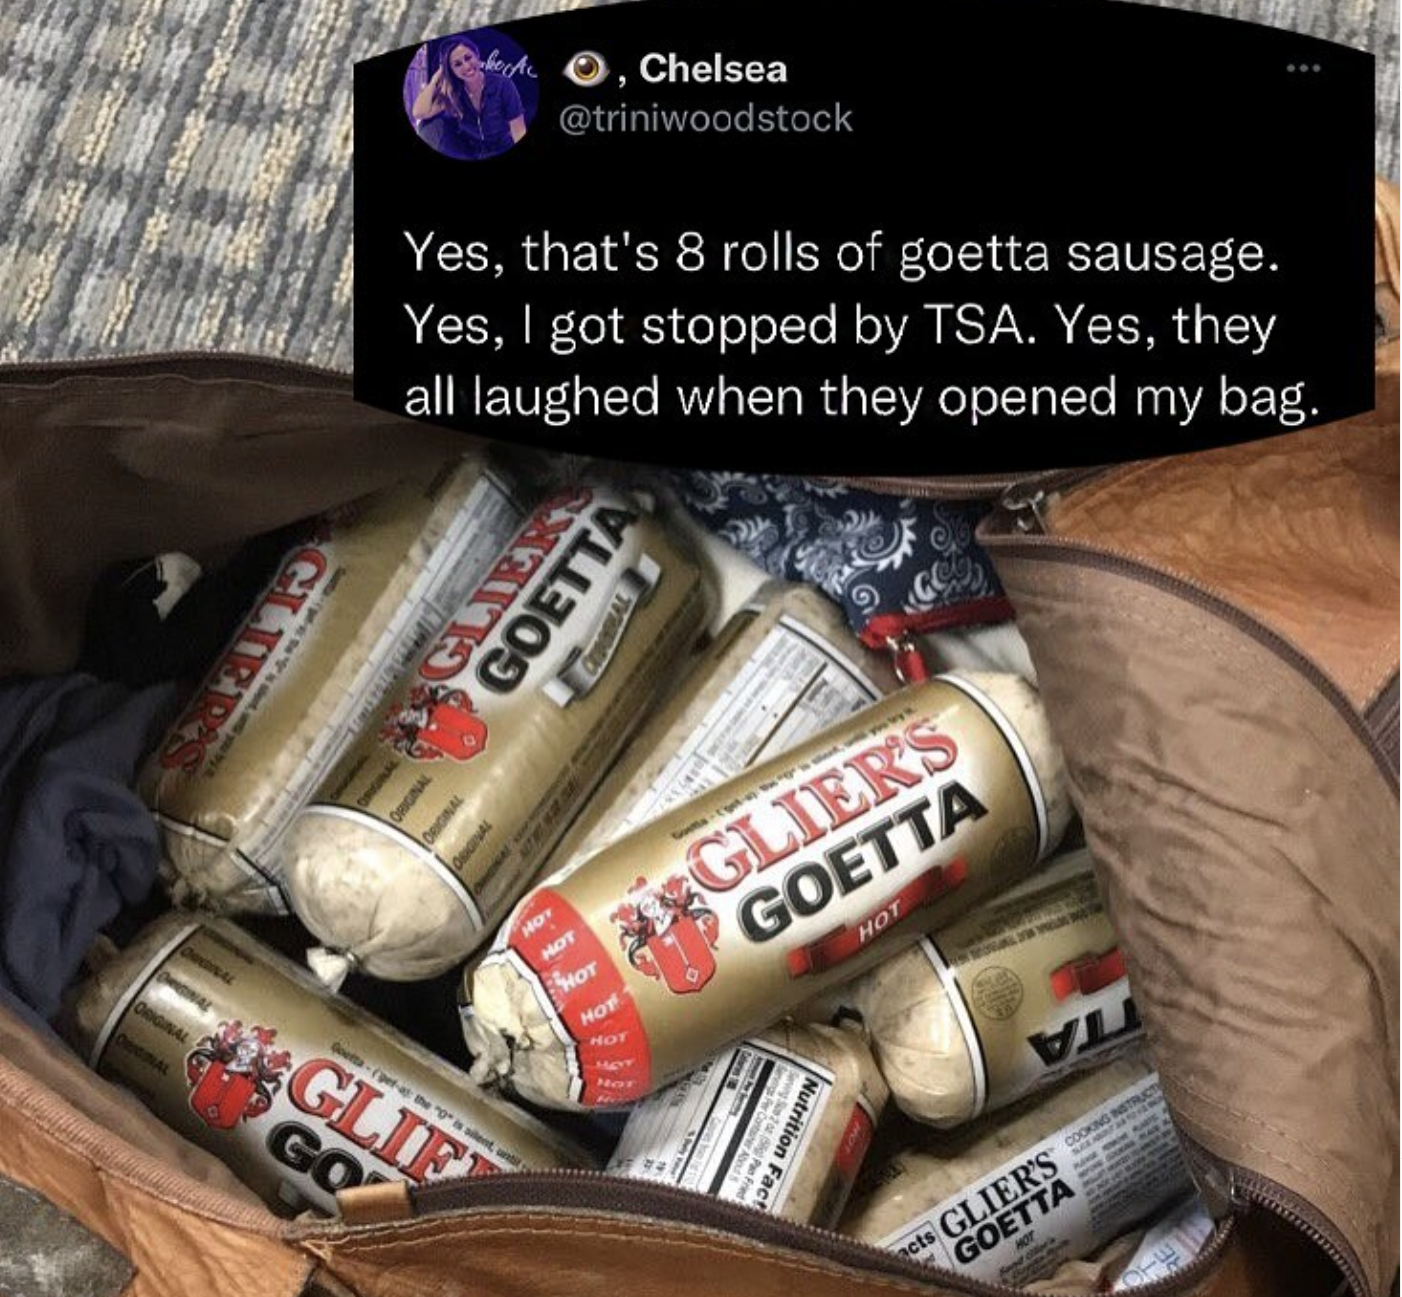 glier's goetta - Gliers Chelsea Yes, that's 8 rolls of goetta sausage. Yes, I got stopped by Tsa. Yes, they all laughed when they opened my bag. Glie Goetta Glif Go How Glier'S Goetta Hot Nutrition Fact cts Glier'S Goetta